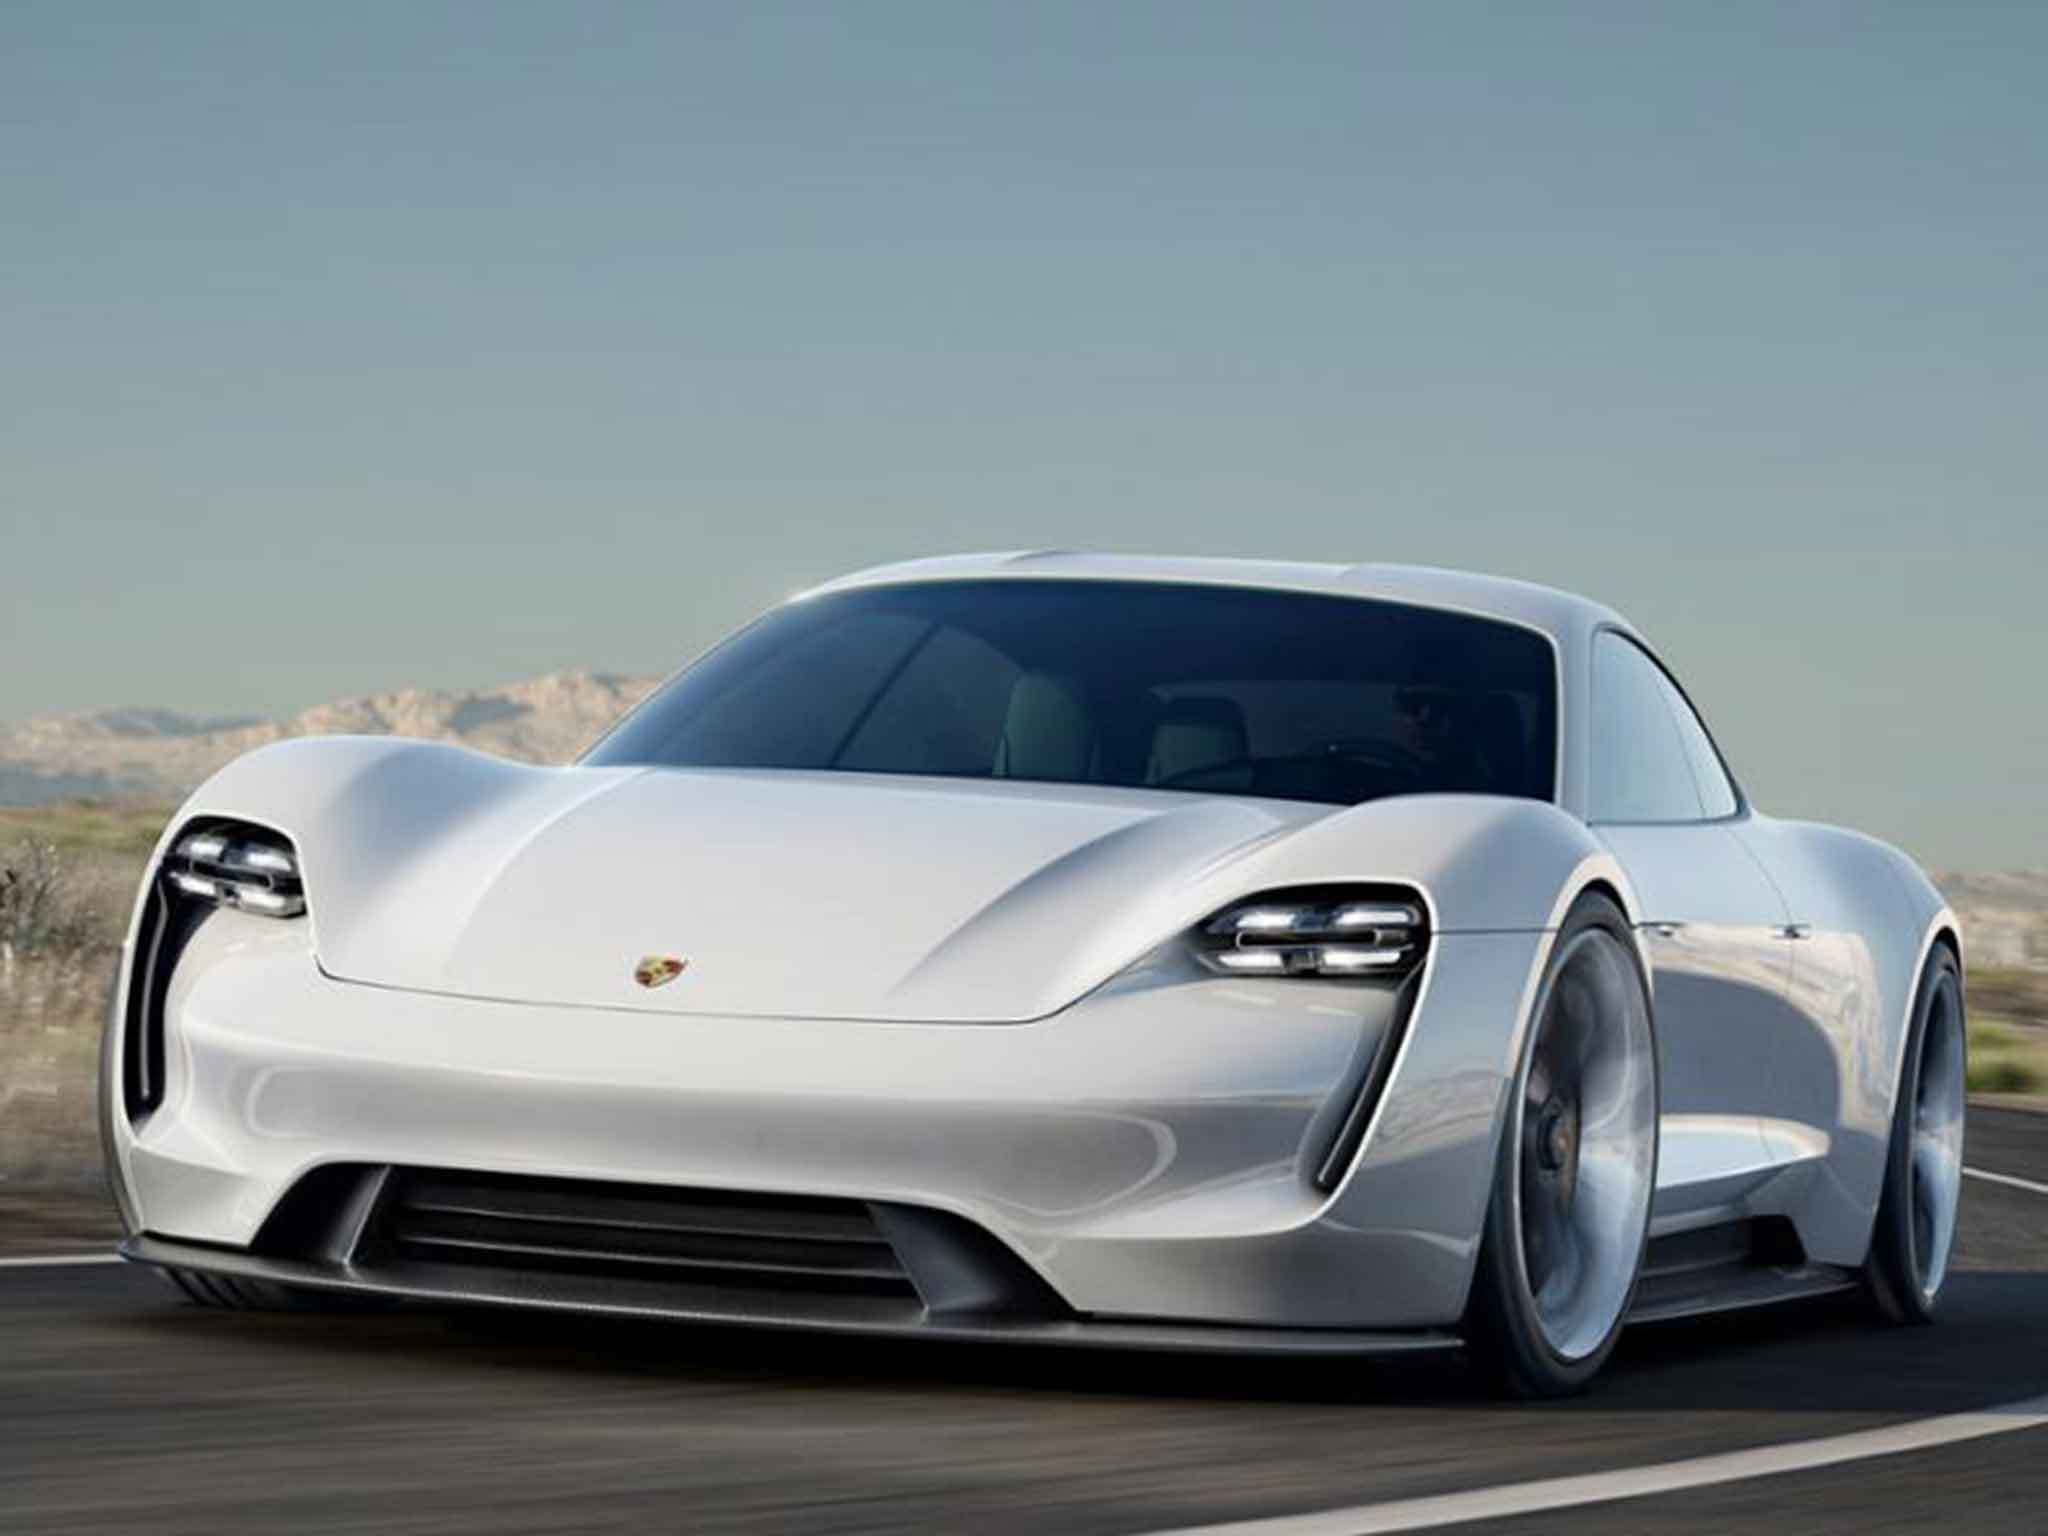 The Porsche Mission E boasts 0 to 60 in 3.5 seconds and 600 horsepower